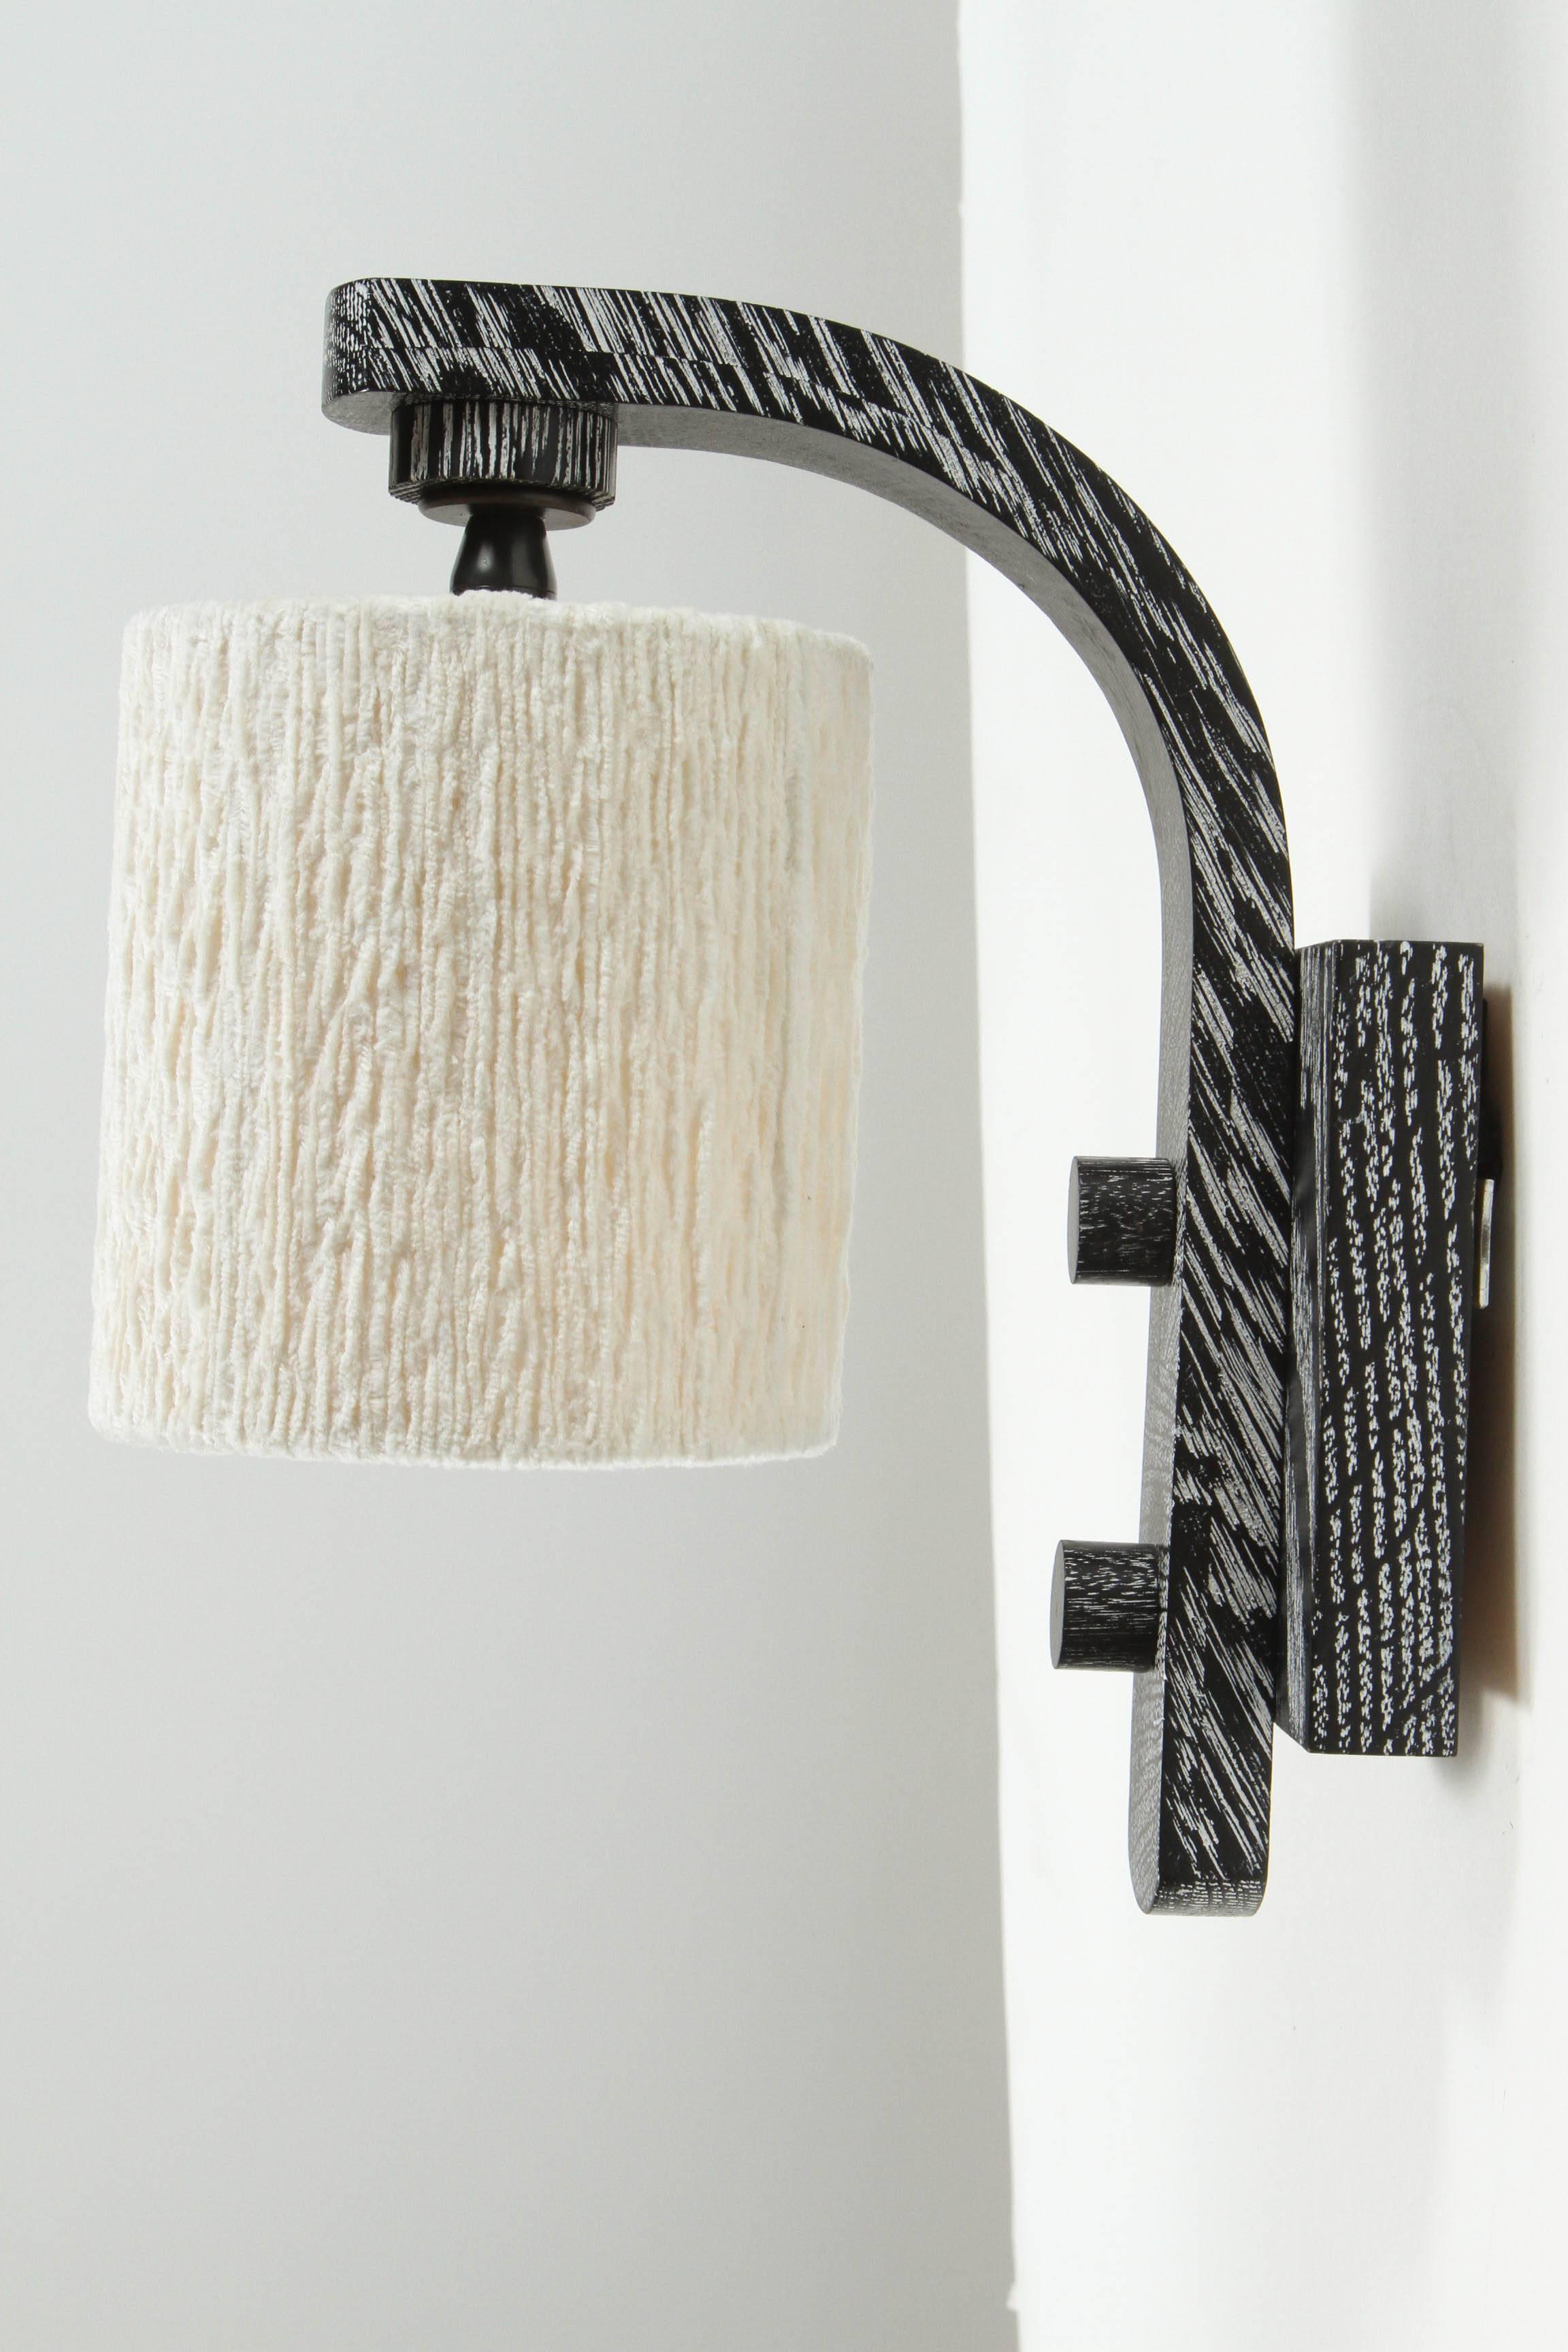 Paul Marra Oak Sconce in ebony finish with cotton chenille shade. By order.

Back plate 4in.W x 4.75in.H, diameter of shade is 4.5in.W; overall dimensions are 4.5in.W x 8.5in. projection x 10.25H.

 